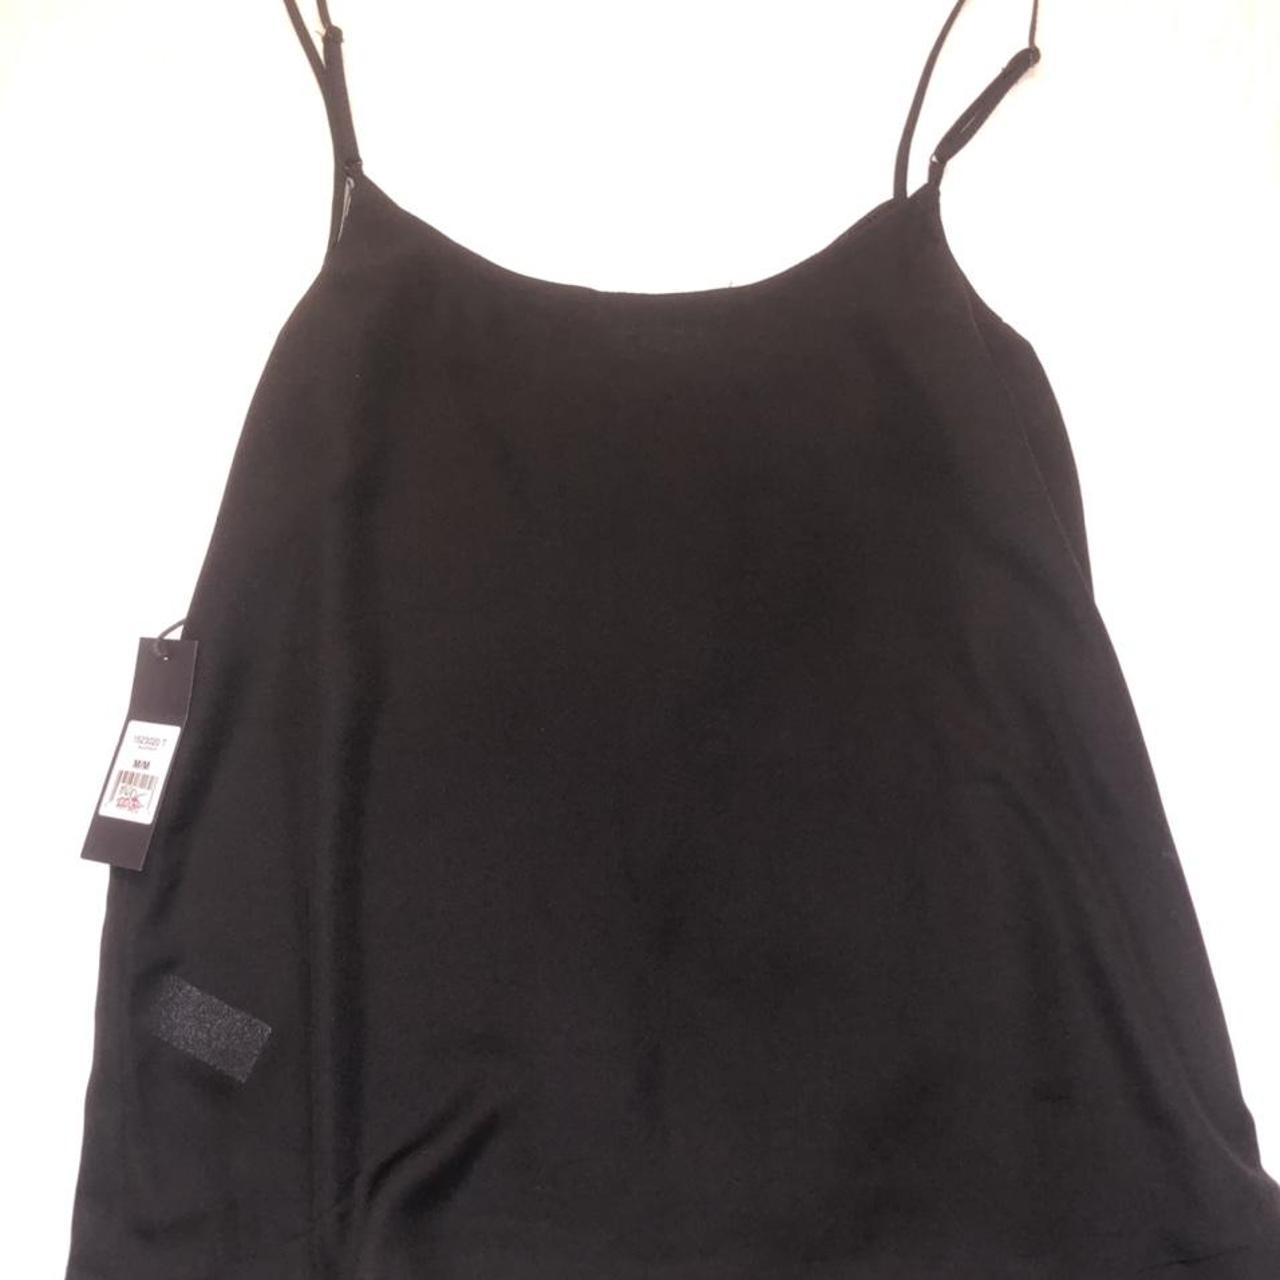 Product Image 2 - NEW WITH TAGS black tank